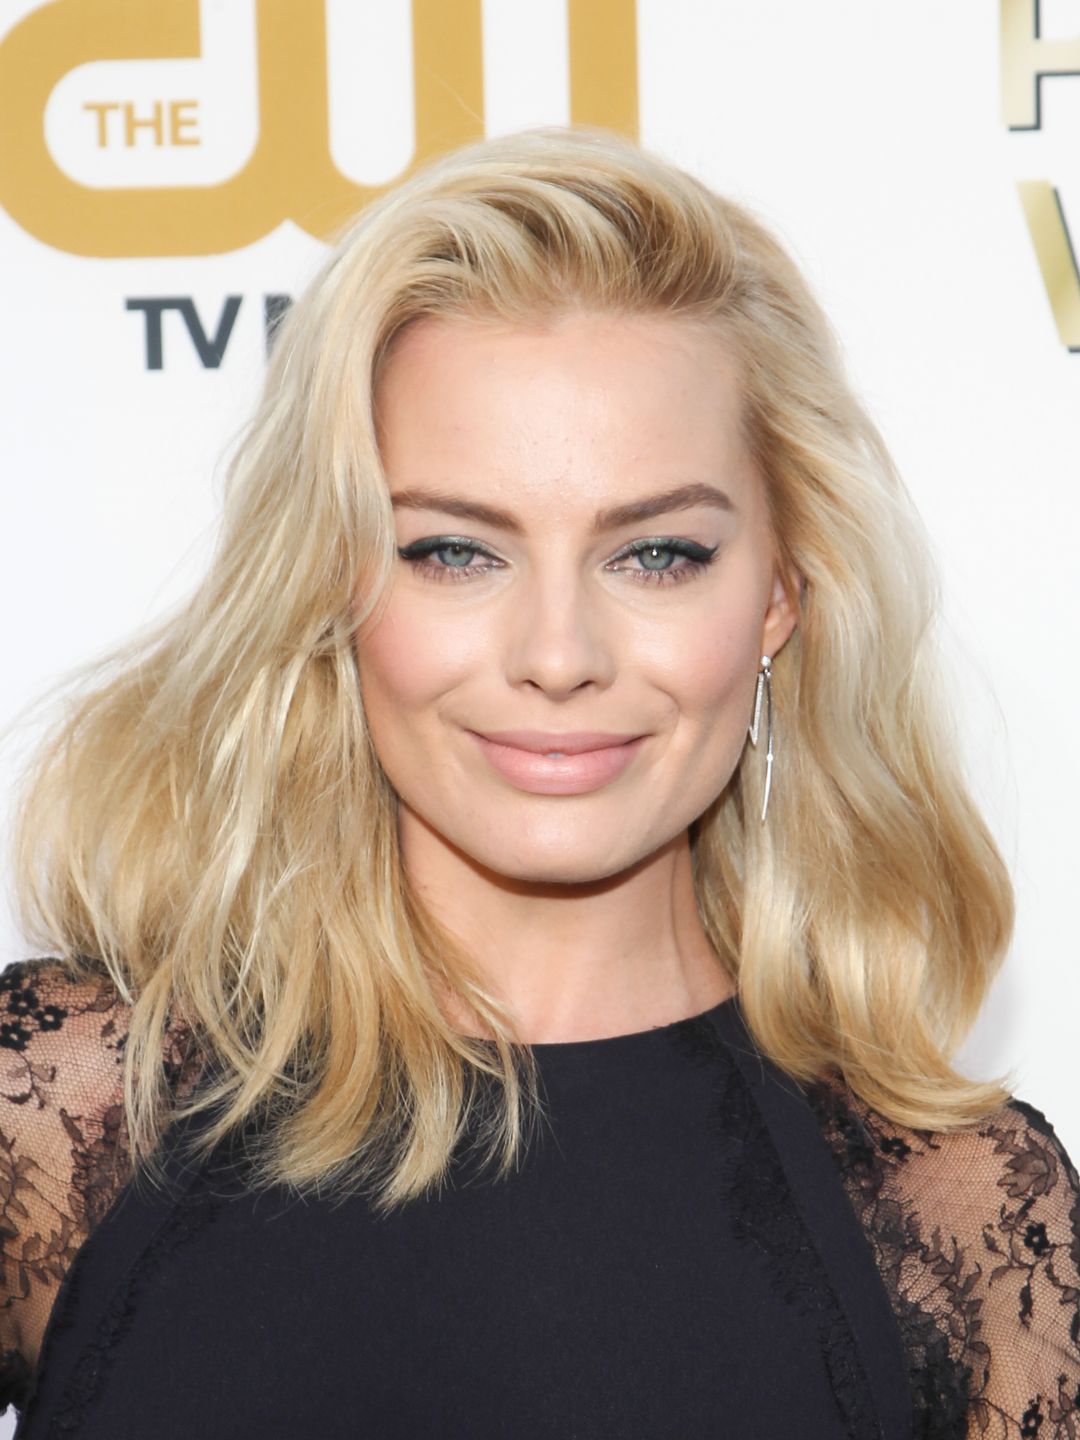 Margot Robbie who are her parents